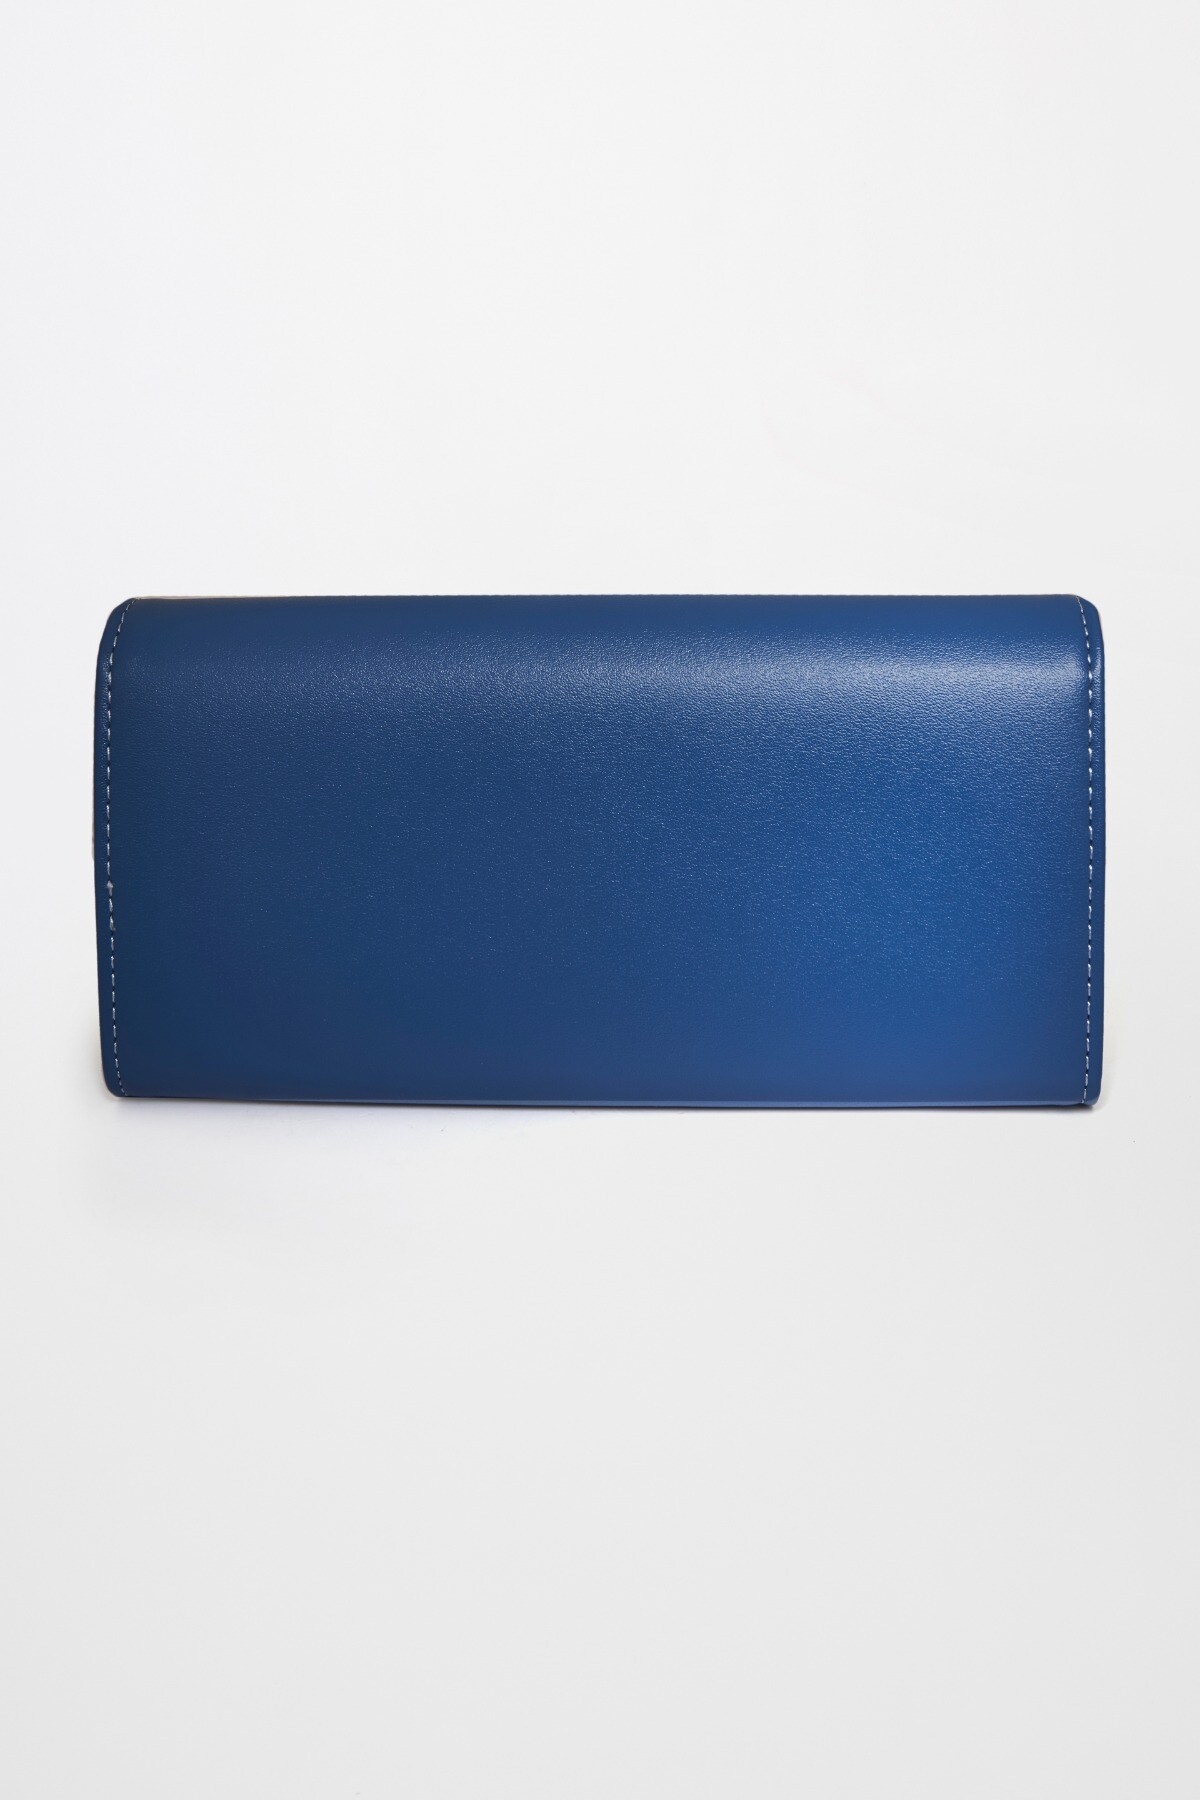 AND | Teal Wallet 3